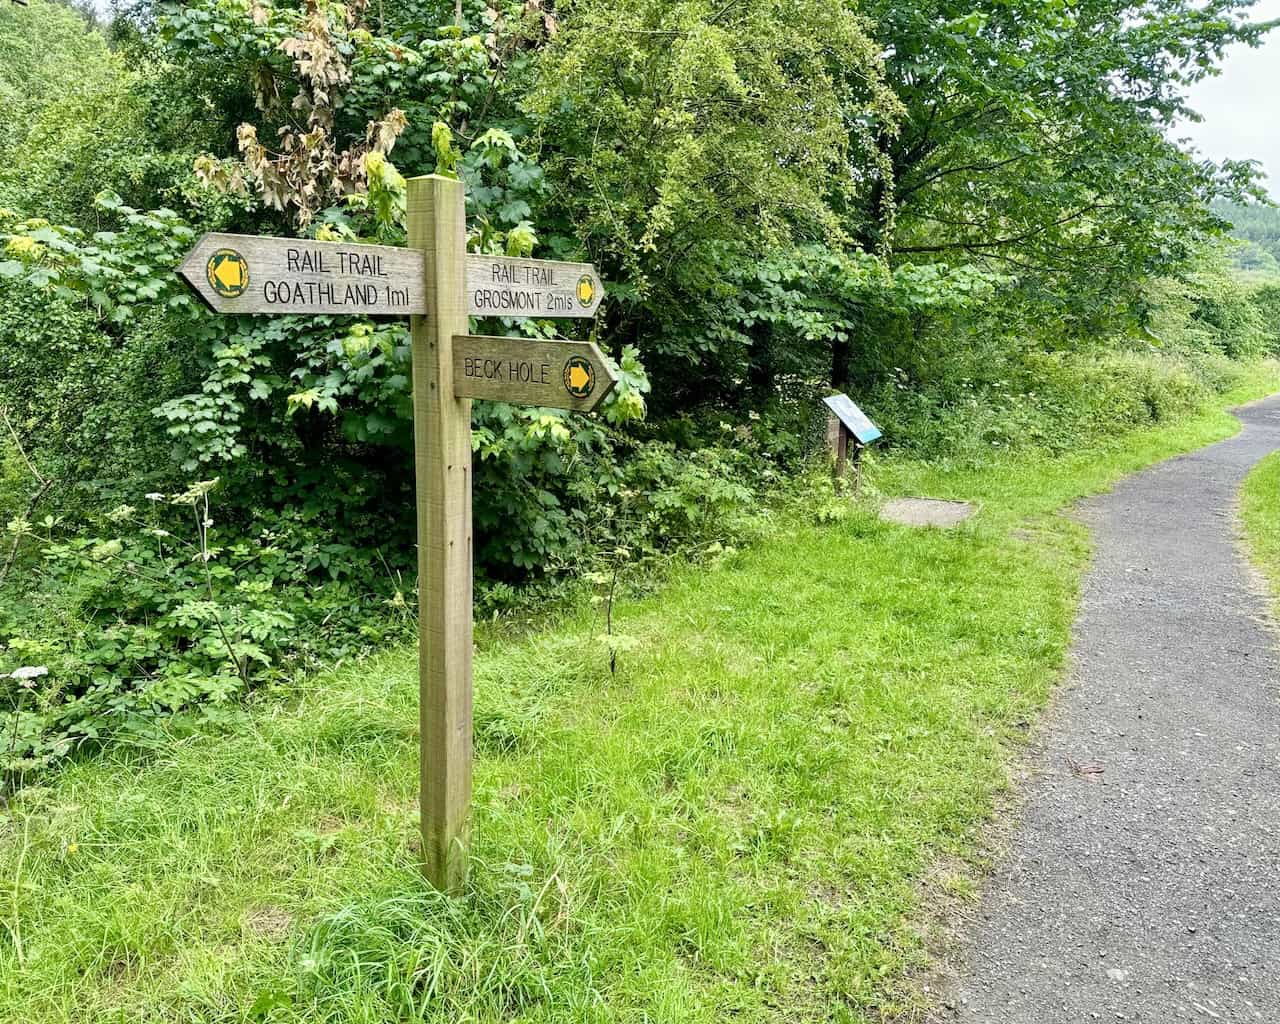 The original site of Beck Hole Station with an interpretation display board explaining the area’s history. A path to Beck Hole village and pub is on the right, but to continue to Grosmont, proceed straight ahead.